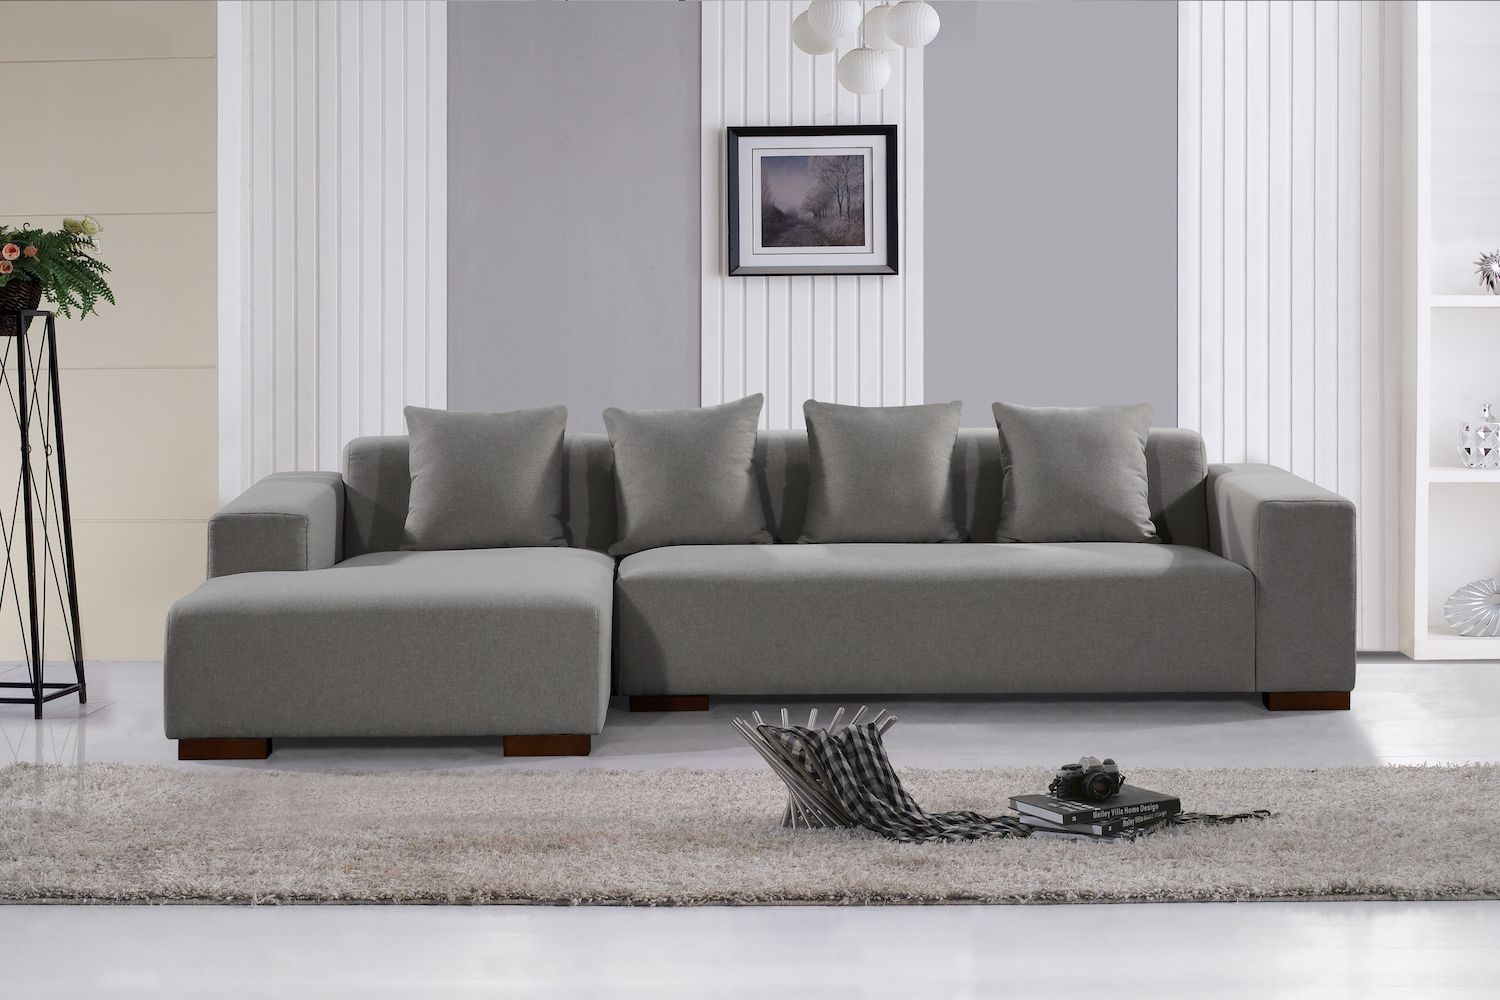 Deep Seating Sectional Sofa – Light Grey Fabric Throughout Noa Sectional Sofas With Ottoman Gray (View 12 of 15)